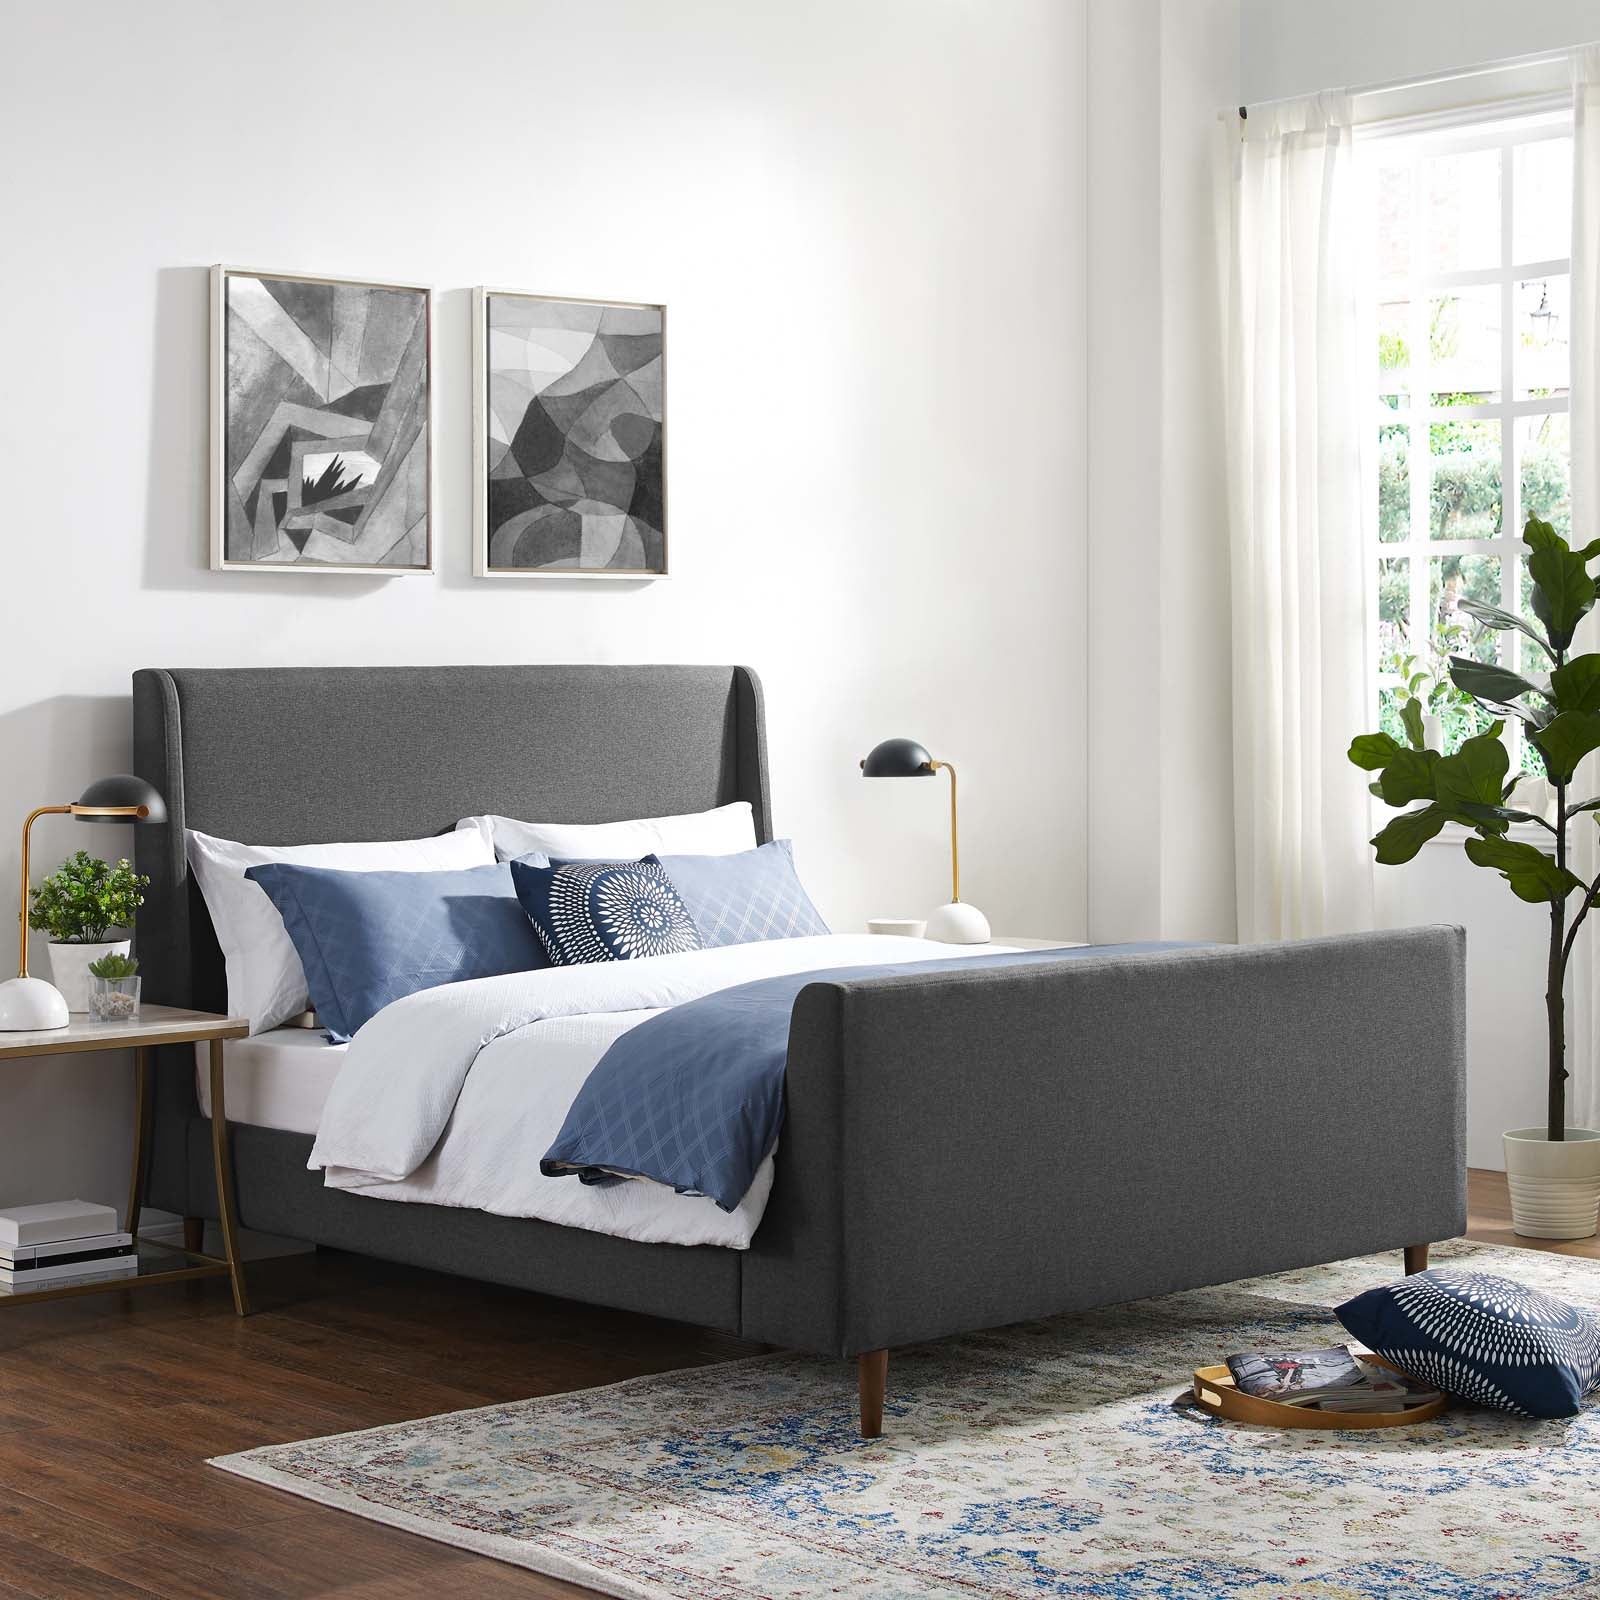 Modway Beds - Aubree Queen Bed Gray